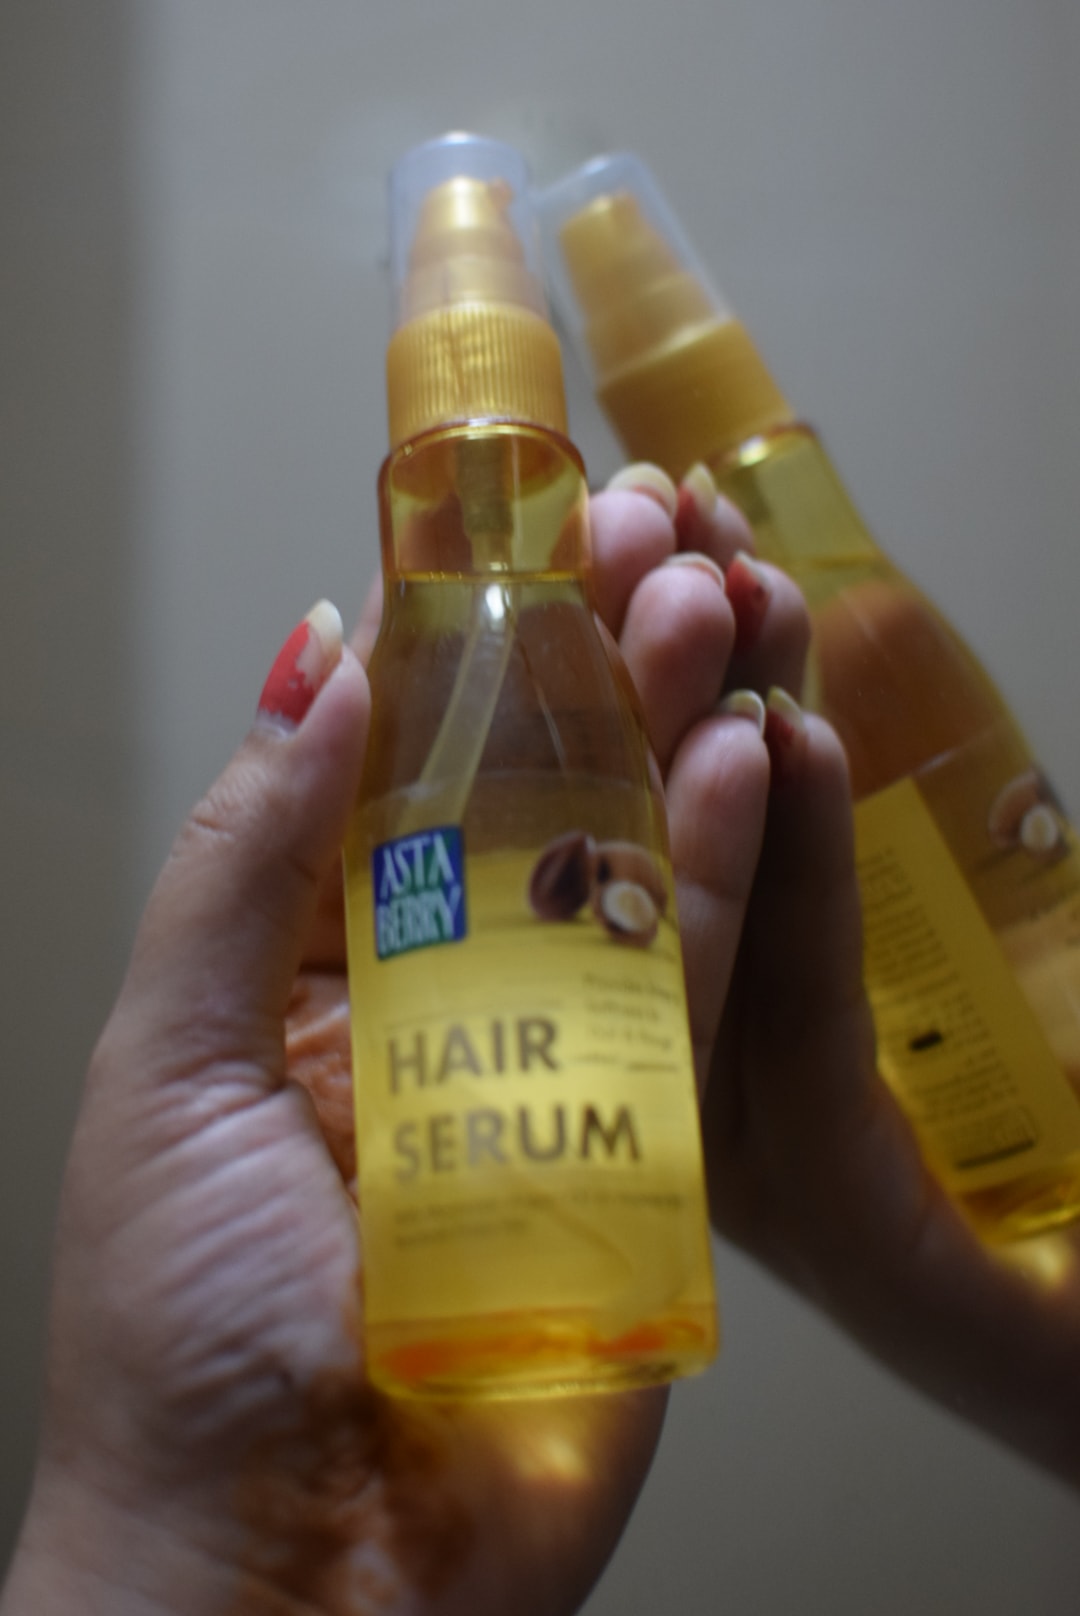 Astaberry Hair Serum Review